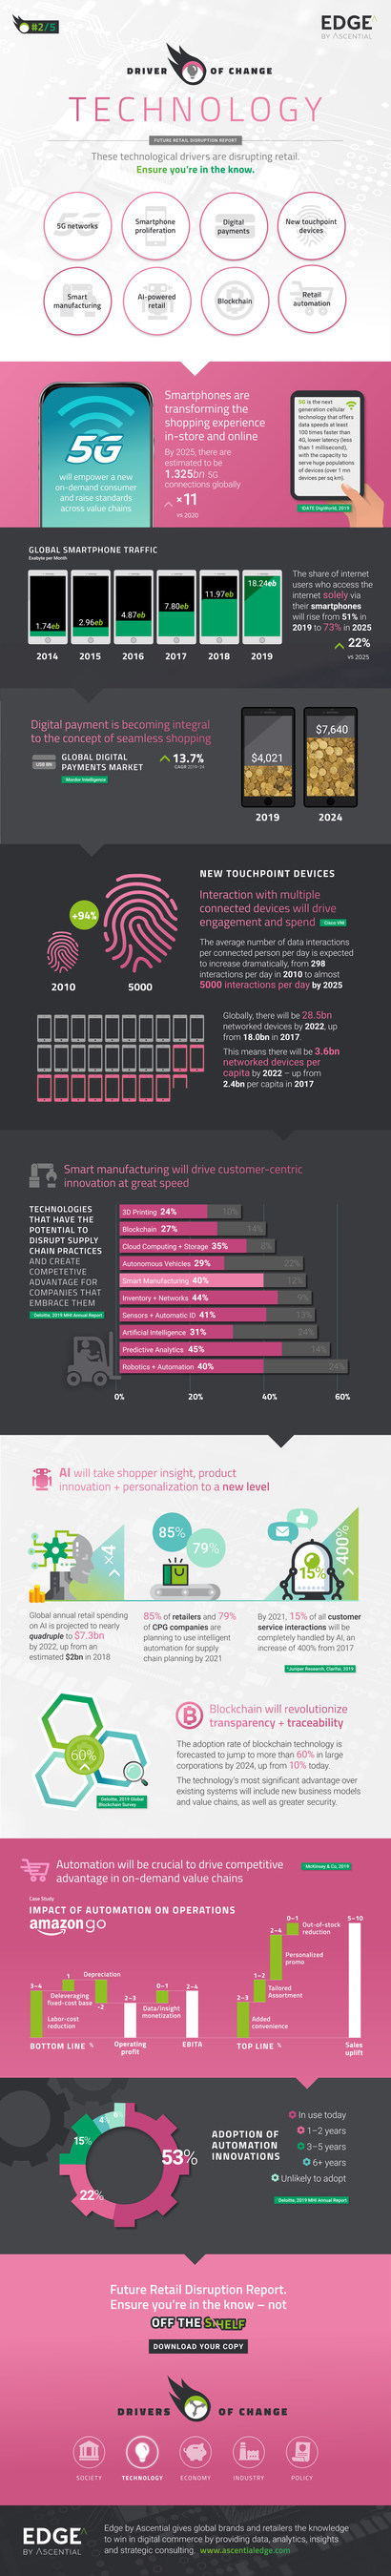 Infographic: These technological drivers are disrupting retail (PRNewsfoto/Edge by Ascential)